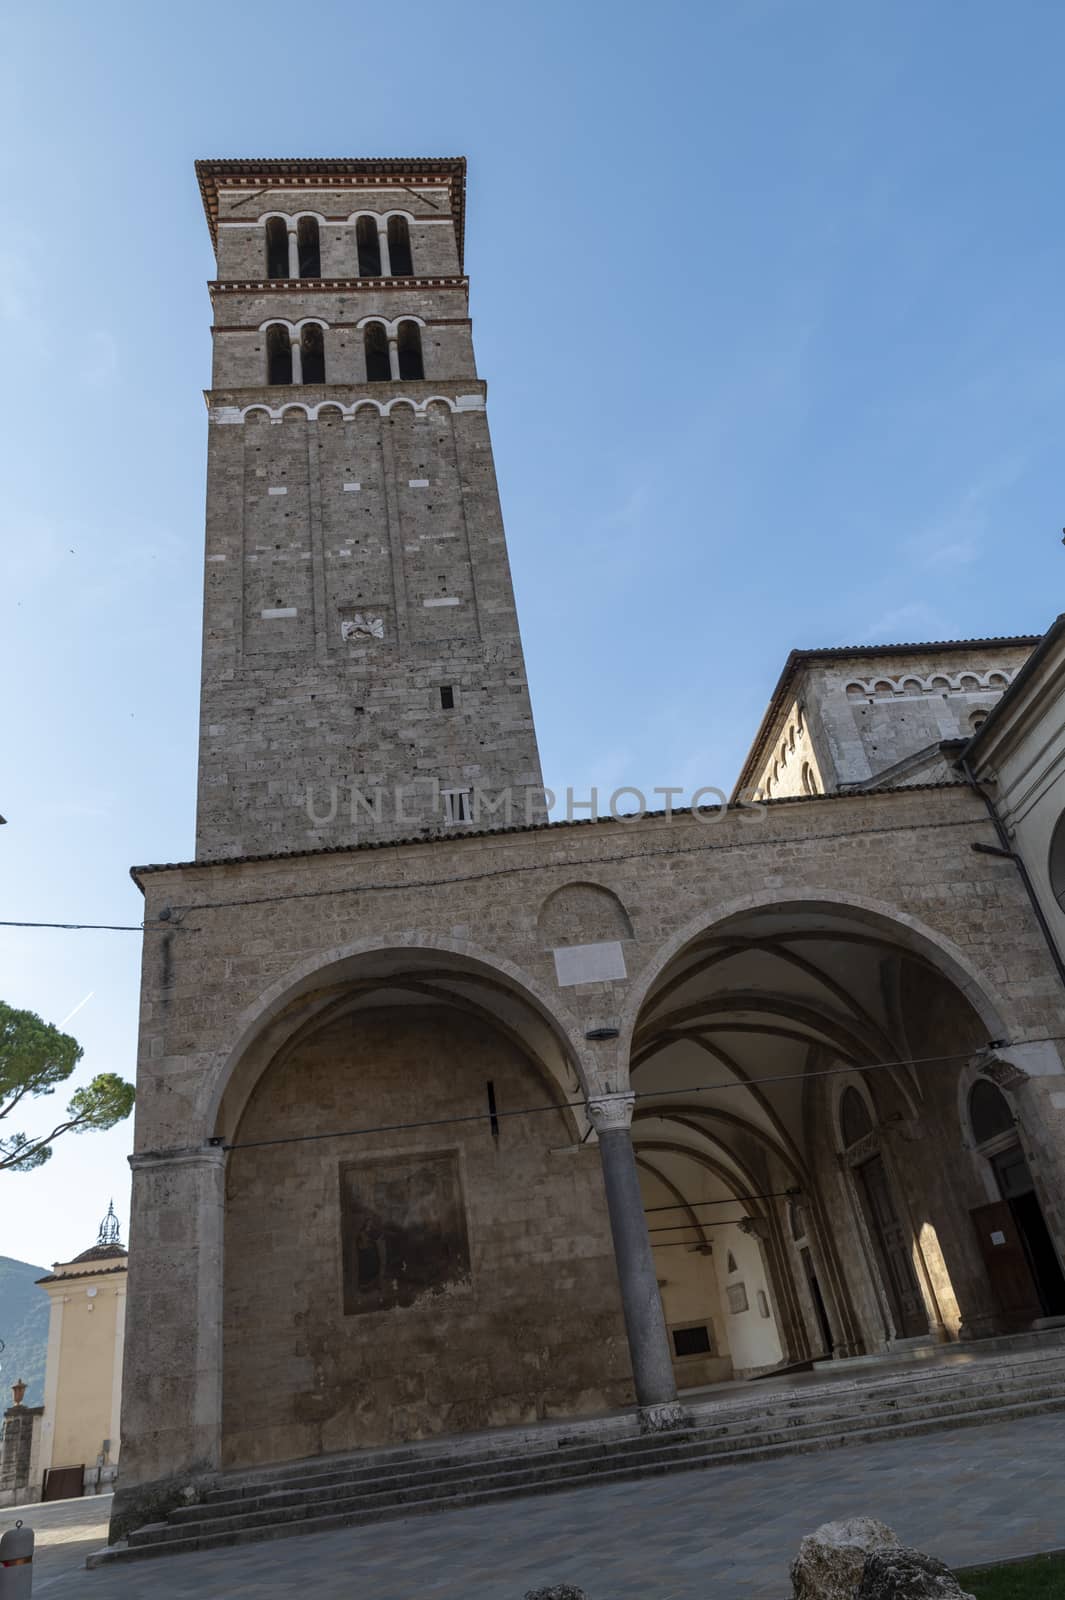 rieti,italy october 02 2020:cathedral of the city of Rieti in the center of the city